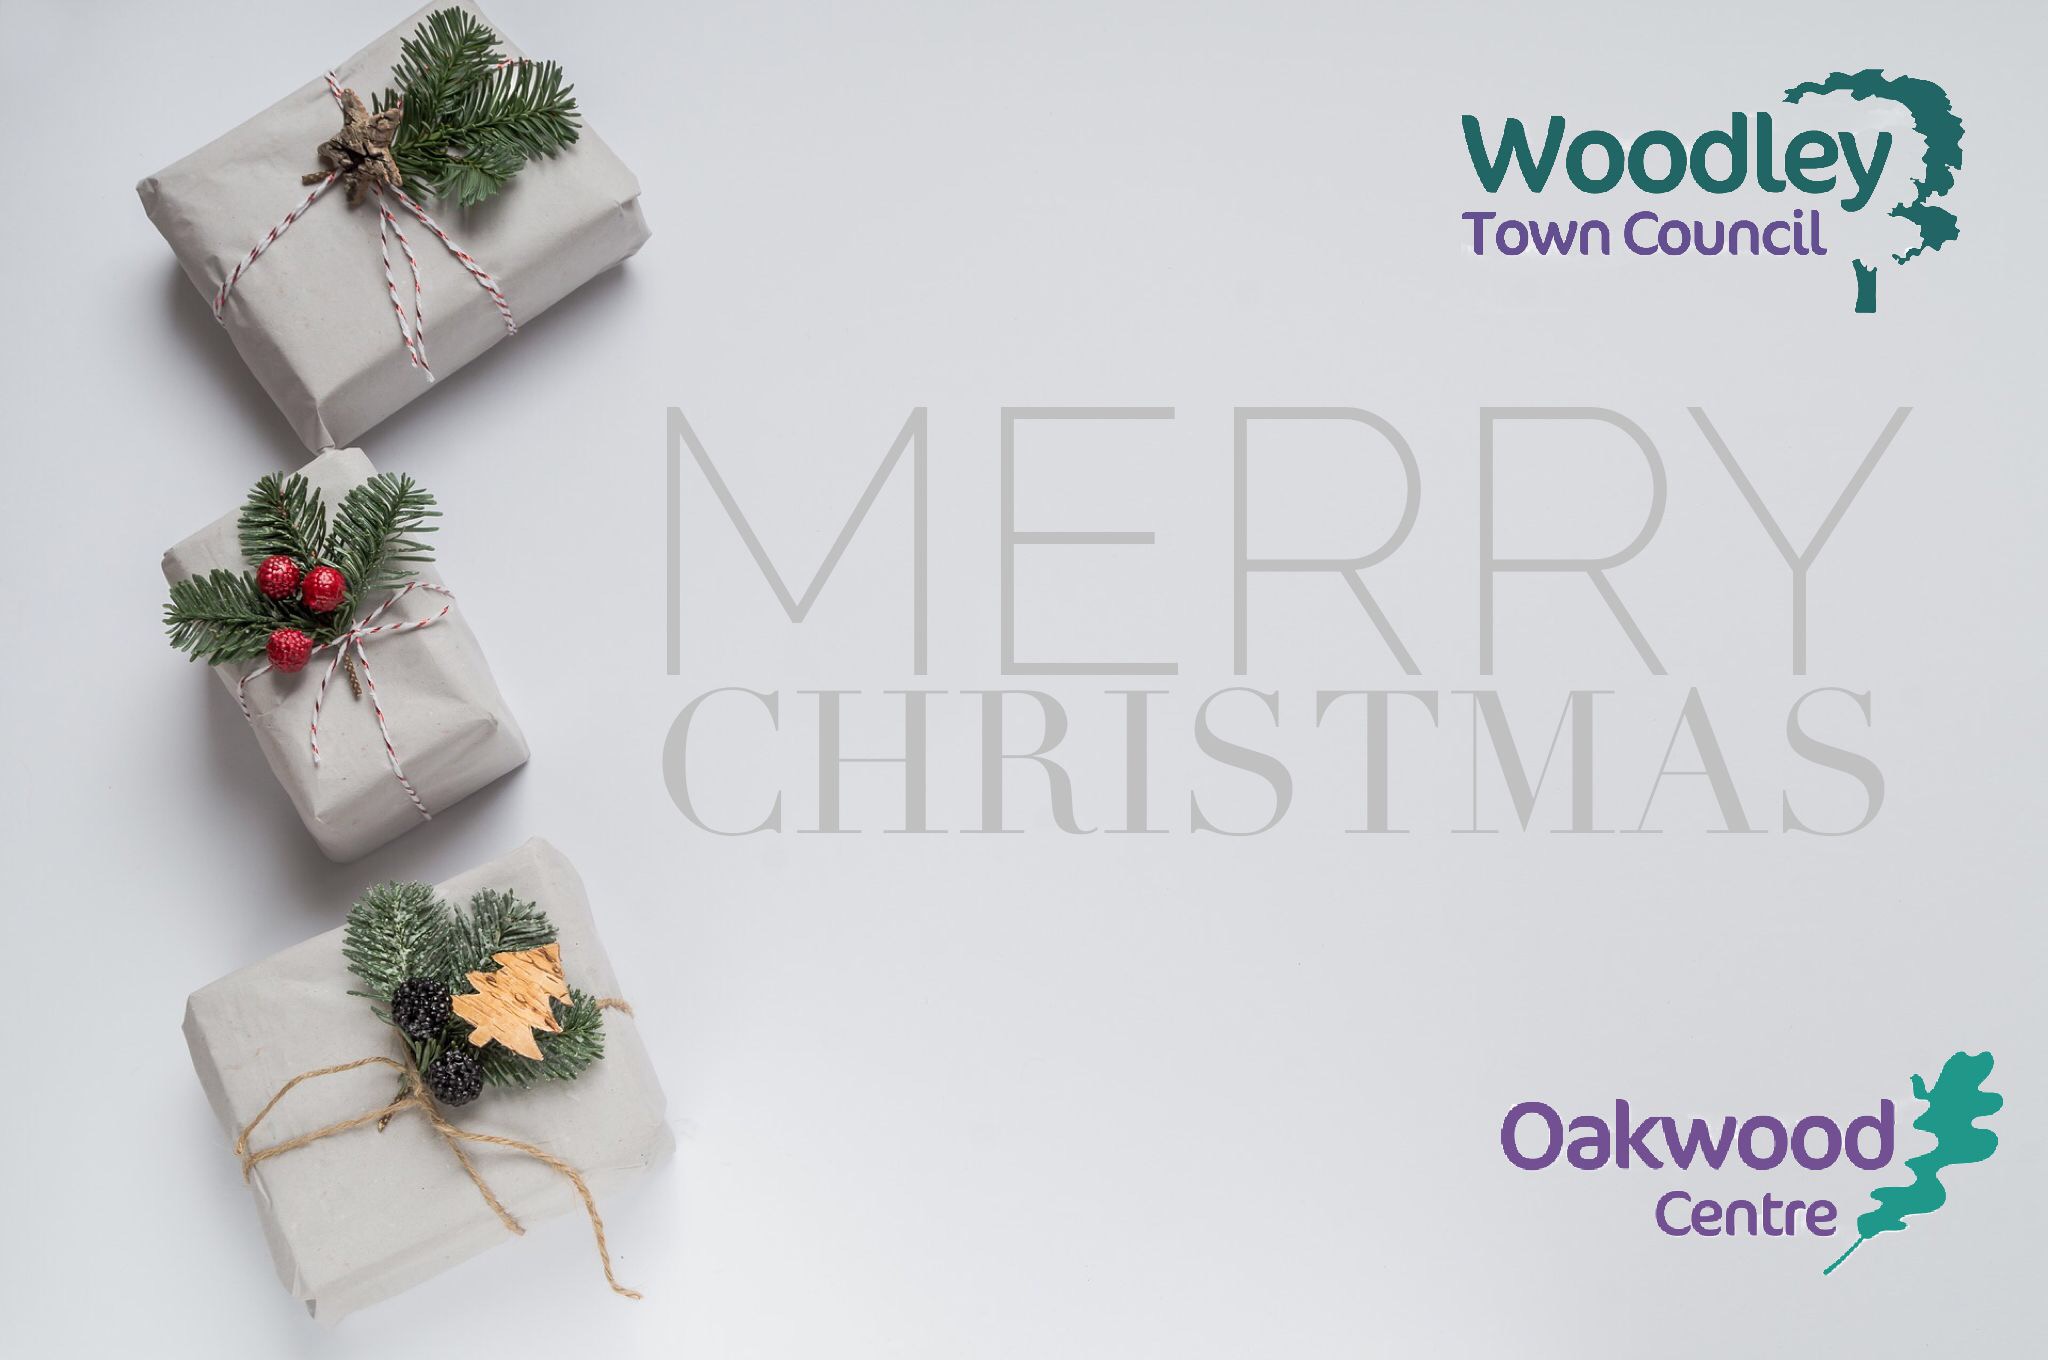 Merry Christmas Woodley Town Council